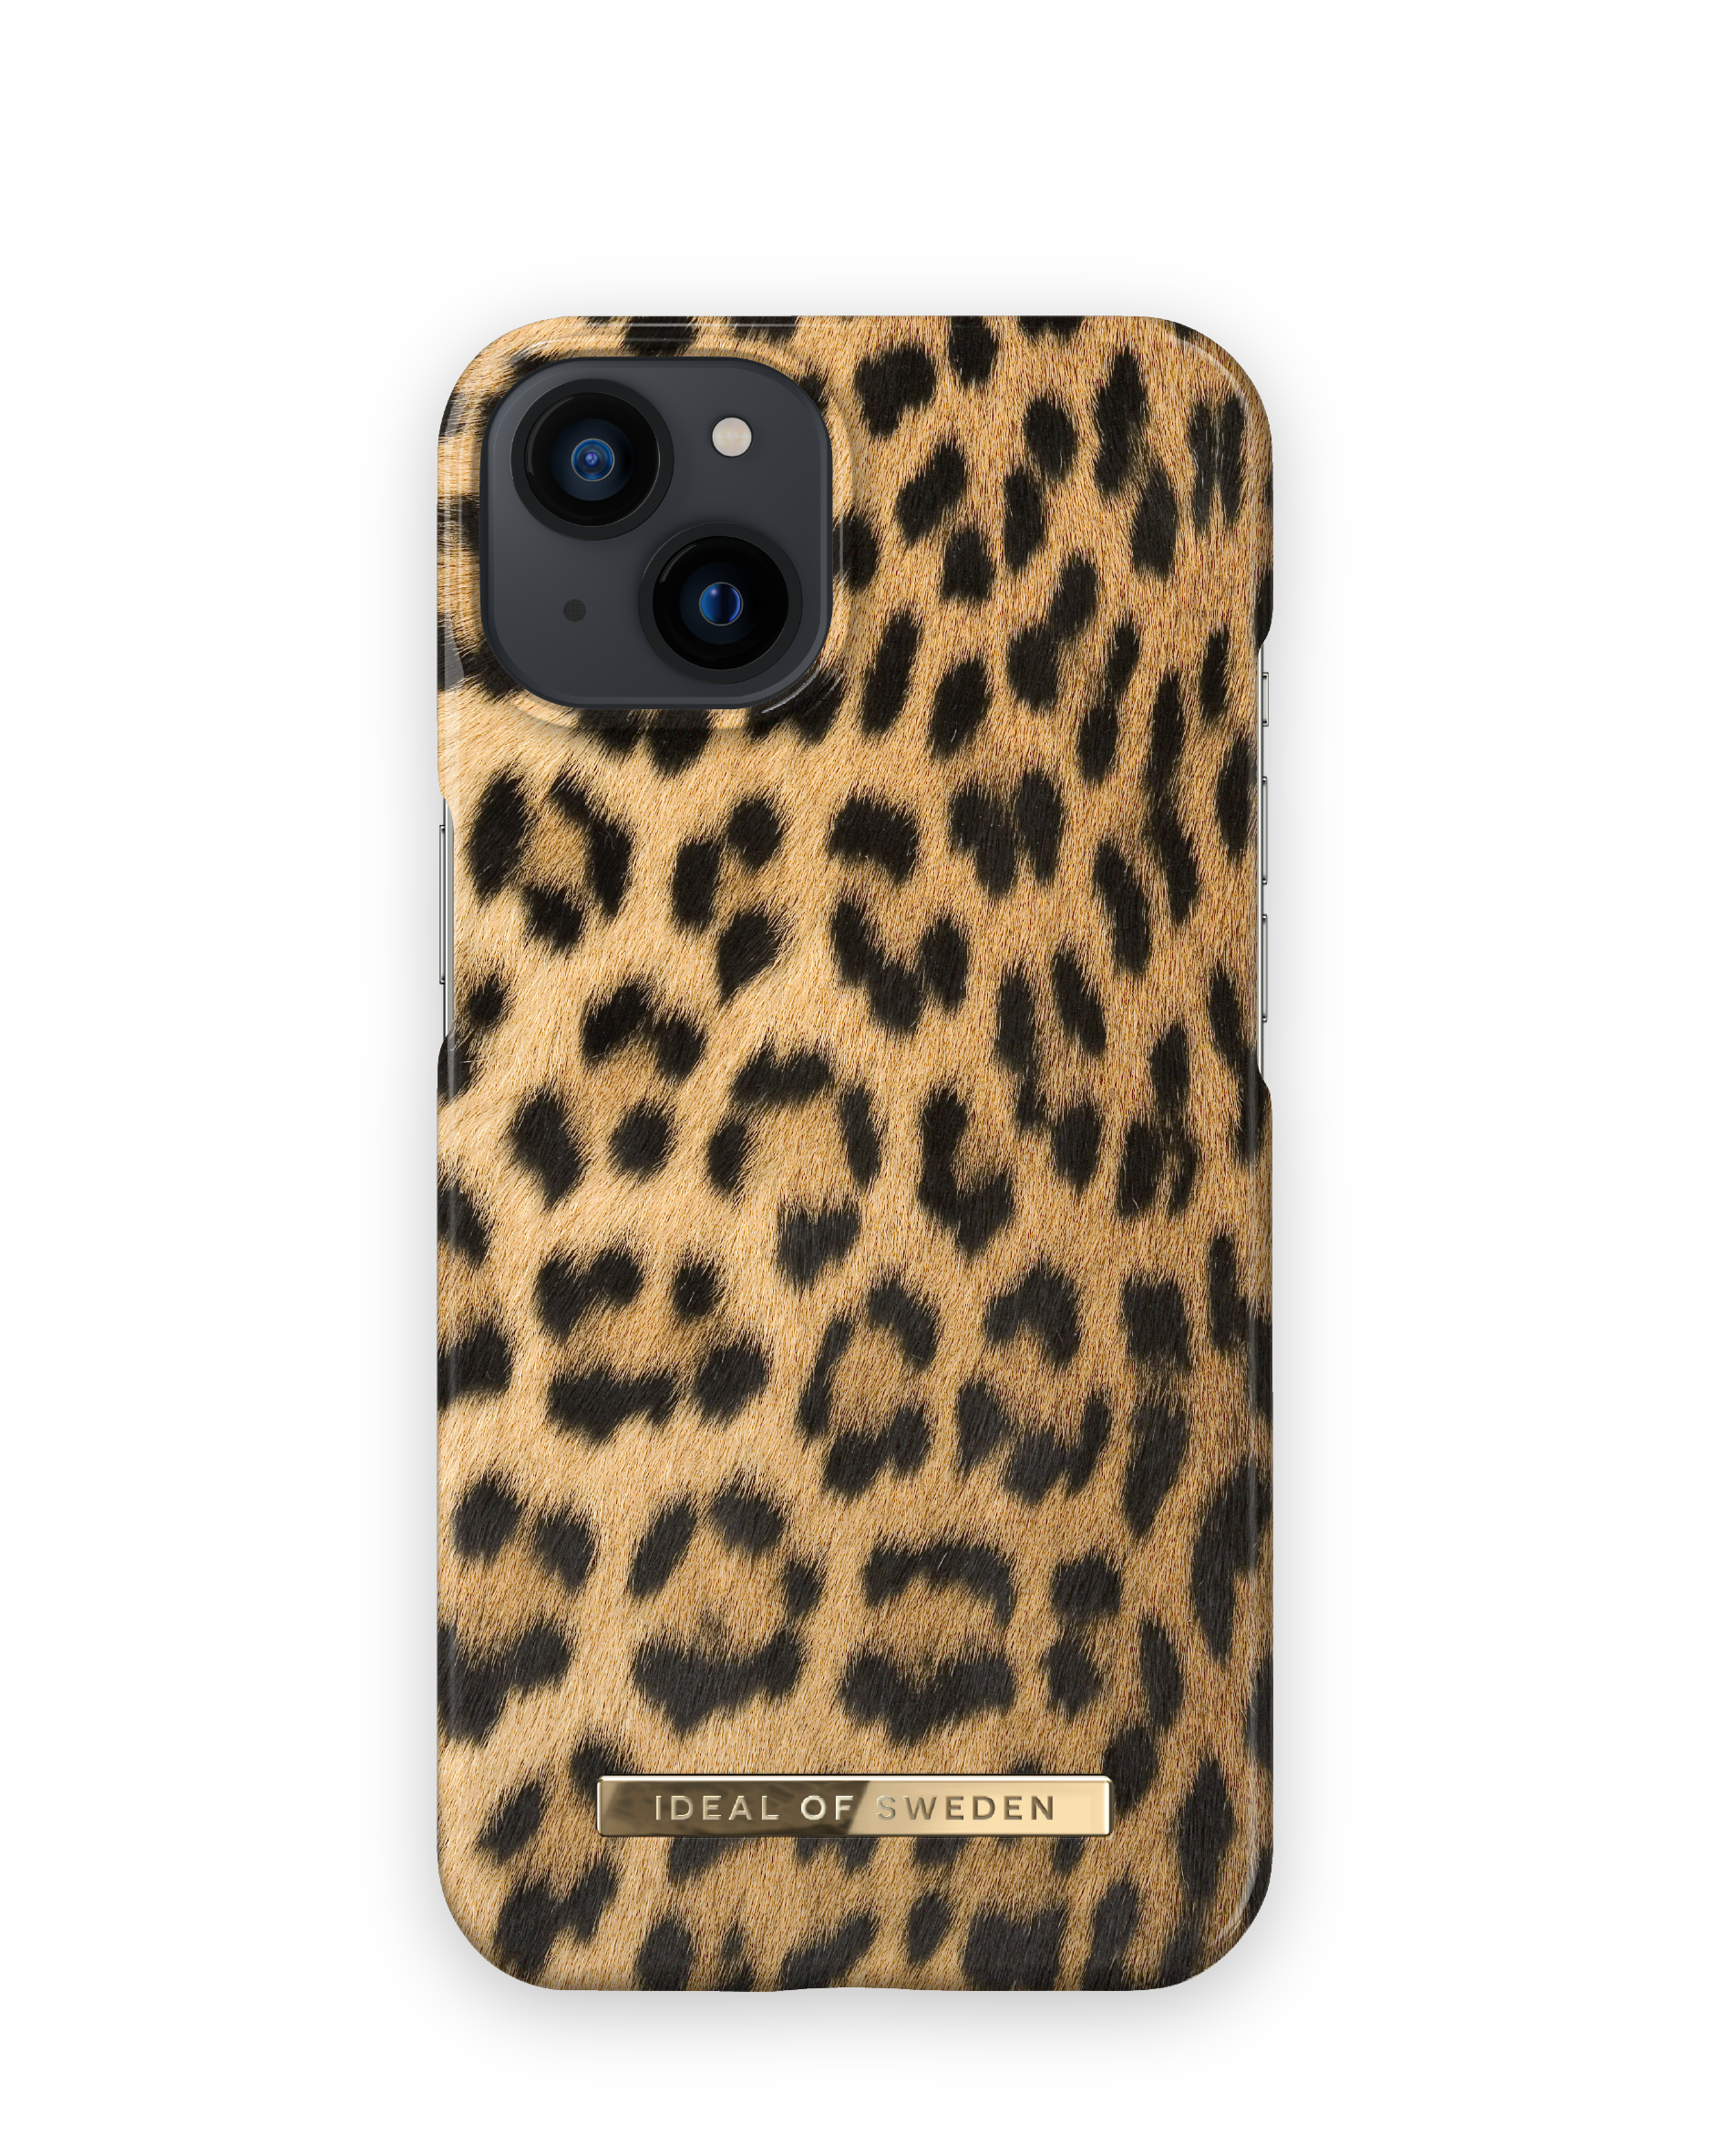 SWEDEN iPhone Leopard Apple, IDFCS17-I2154-67, Wild Mini, OF IDEAL 13 Backcover,